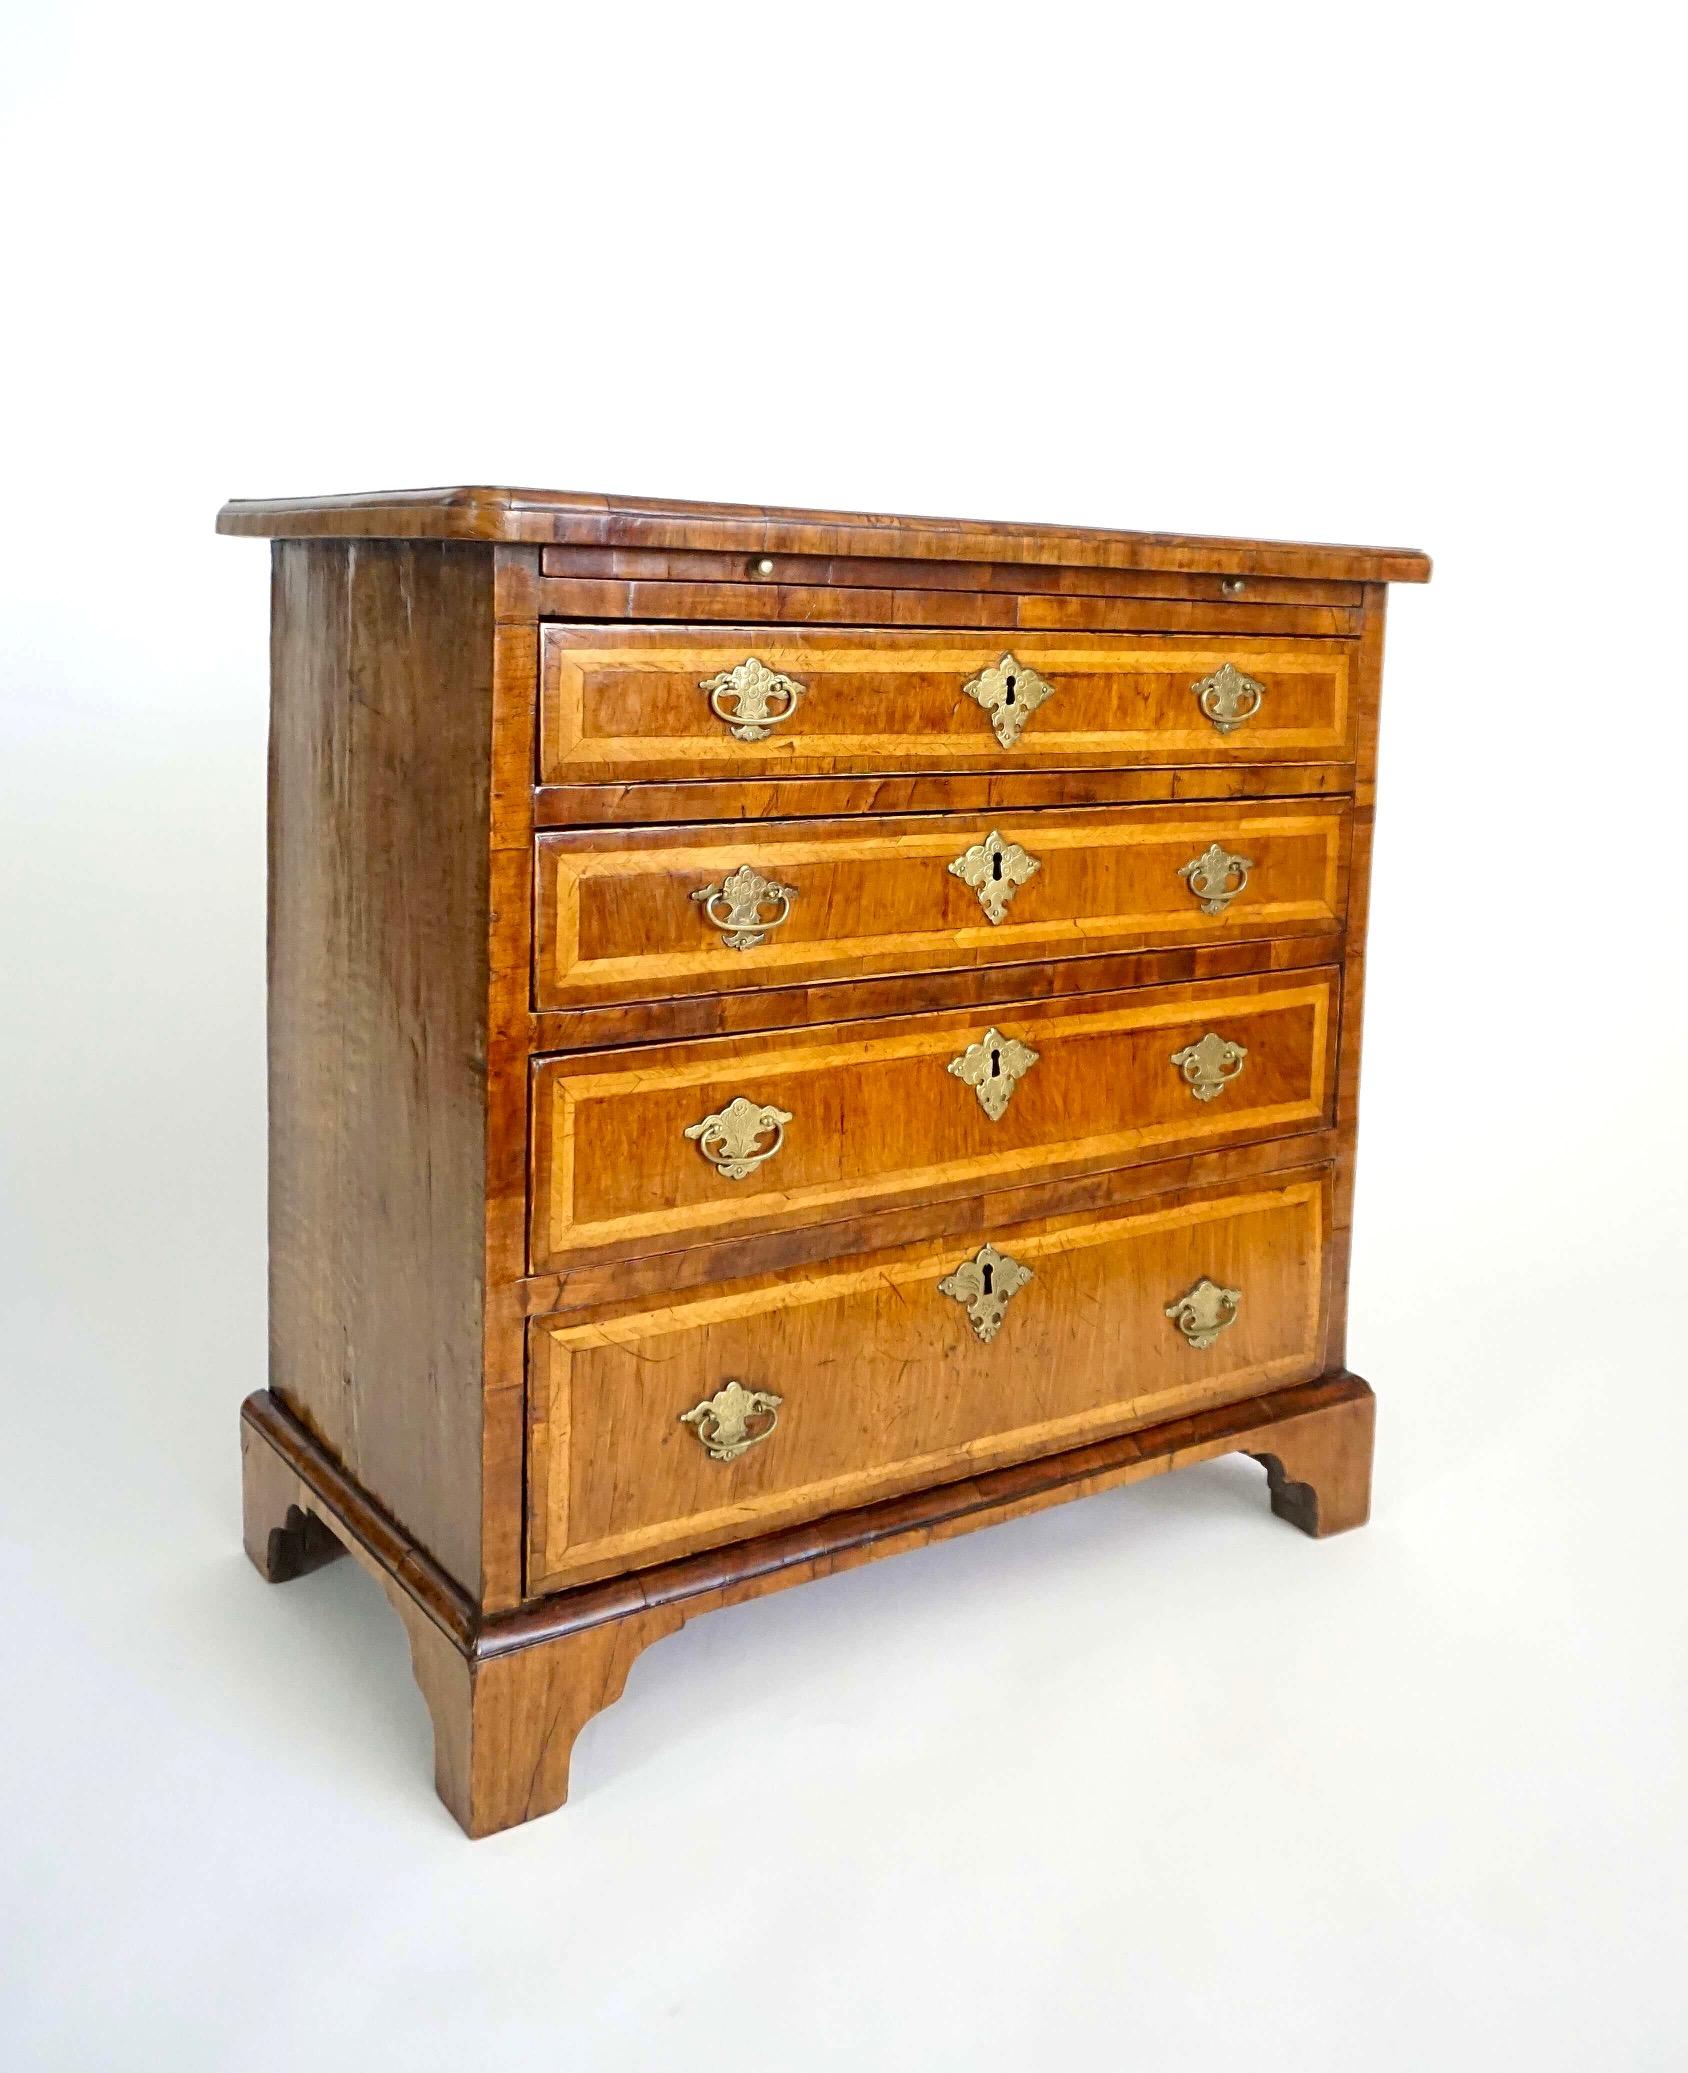 English Walnut and Satinwood Inlaid Petite Chest or Bachelor's Chest, circa 1715 For Sale 3